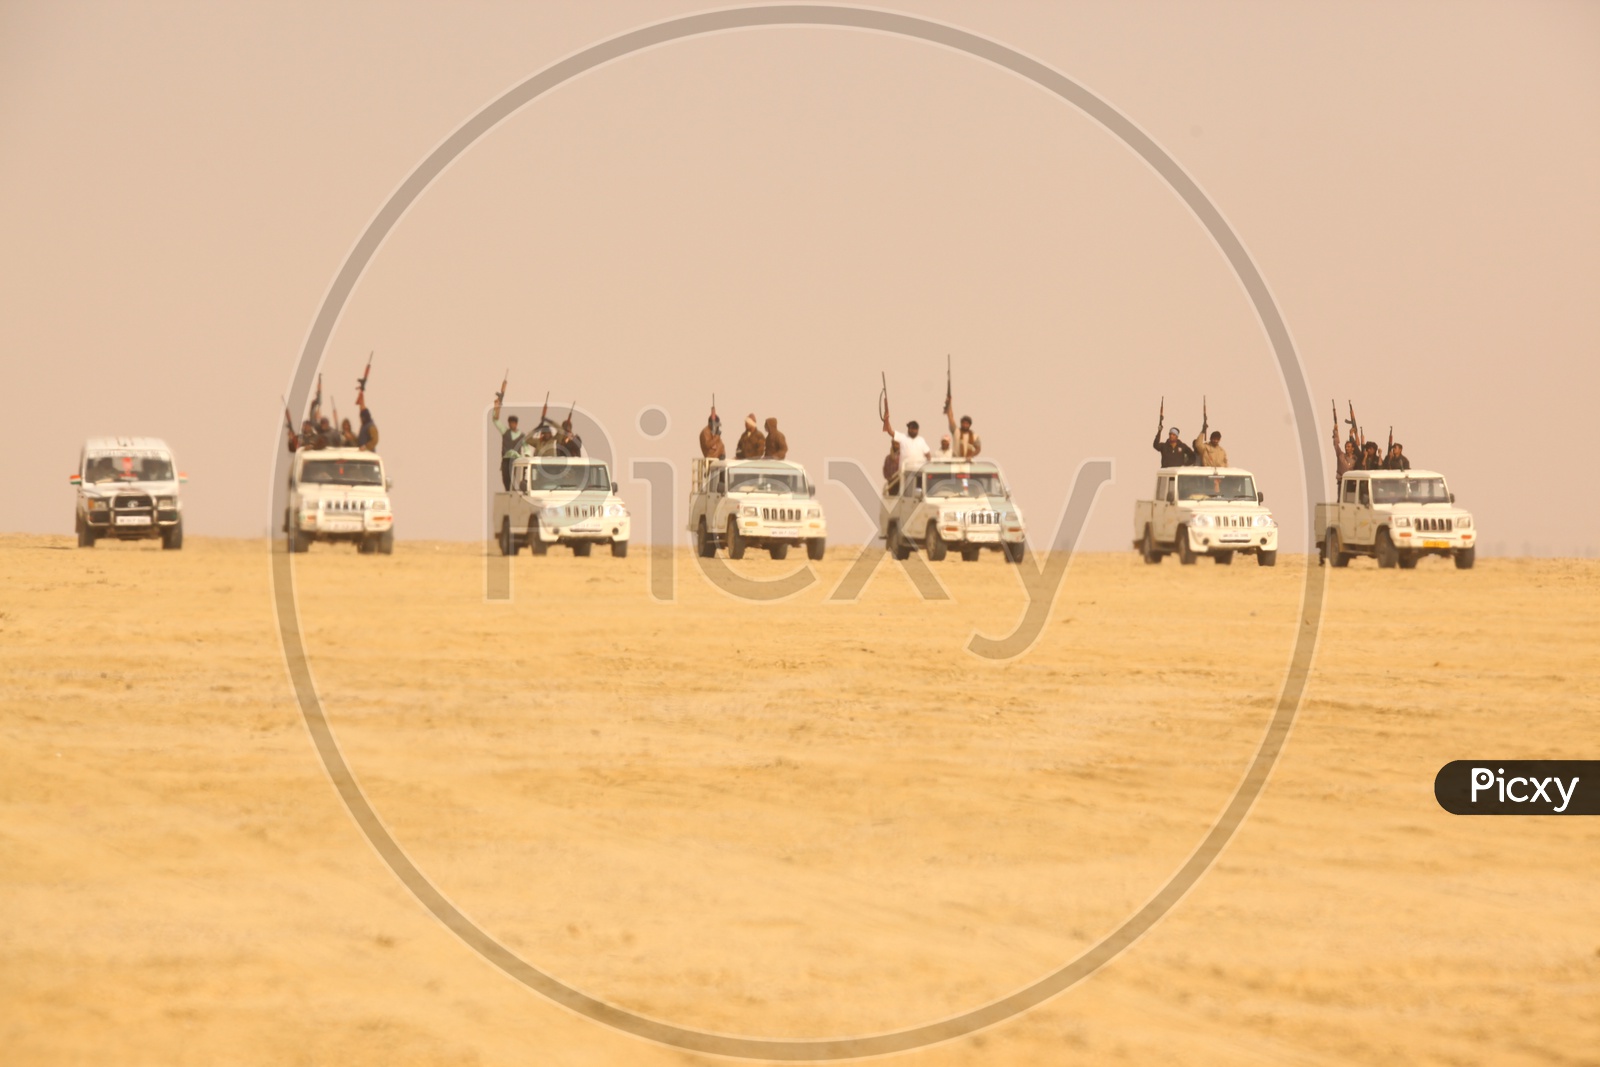 group of vehicles and people with guns in the desert